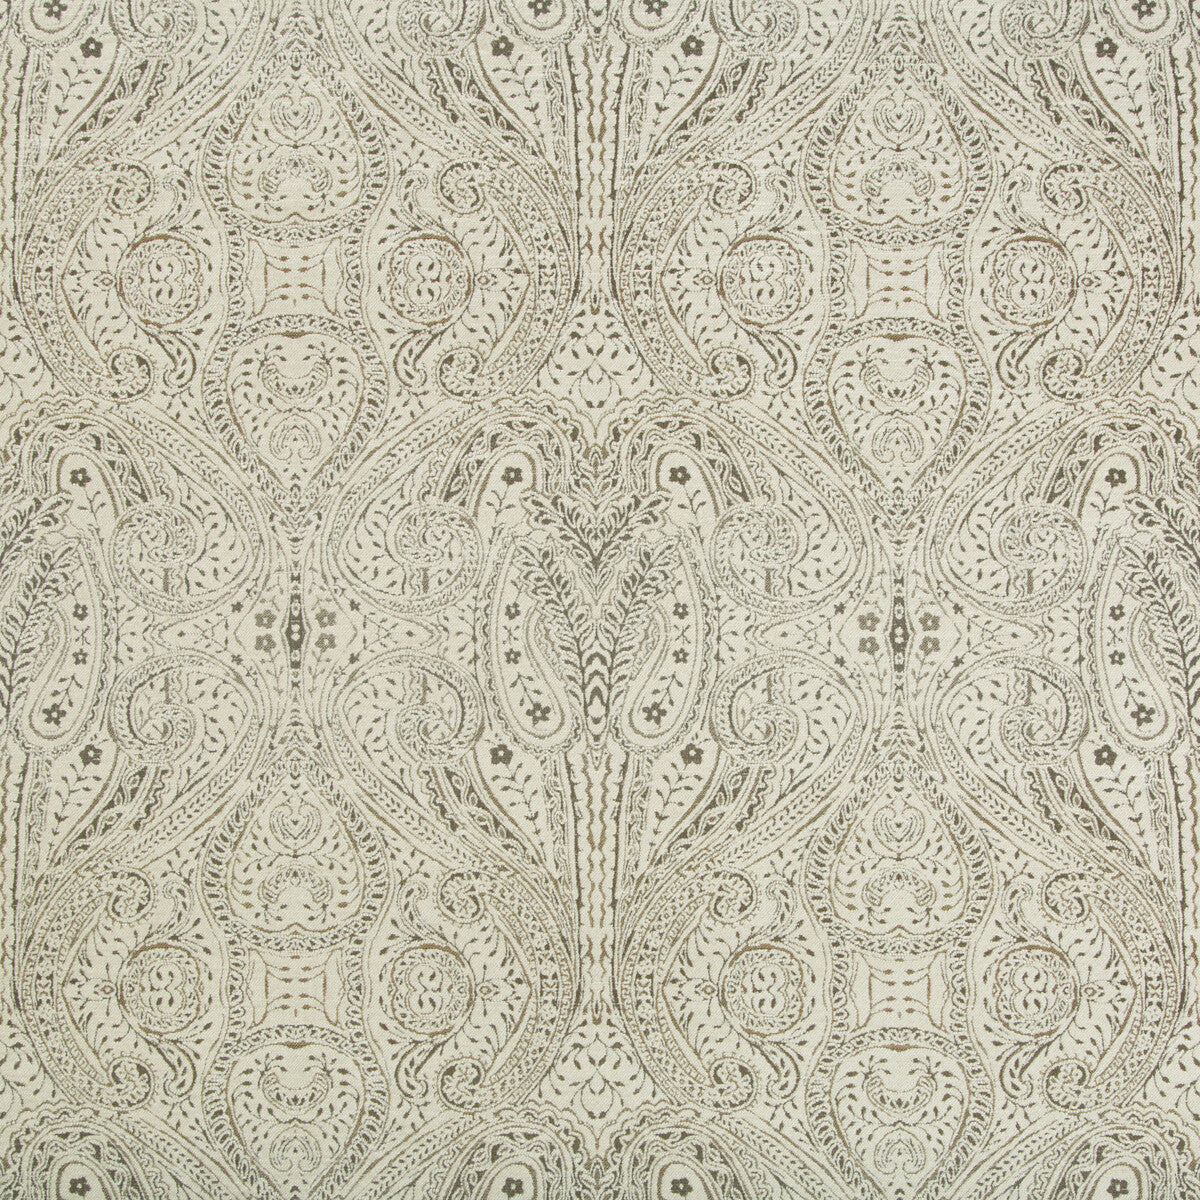 Kravet Design fabric in 35007-11 color - pattern 35007.11.0 - by Kravet Design in the Performance Crypton Home collection